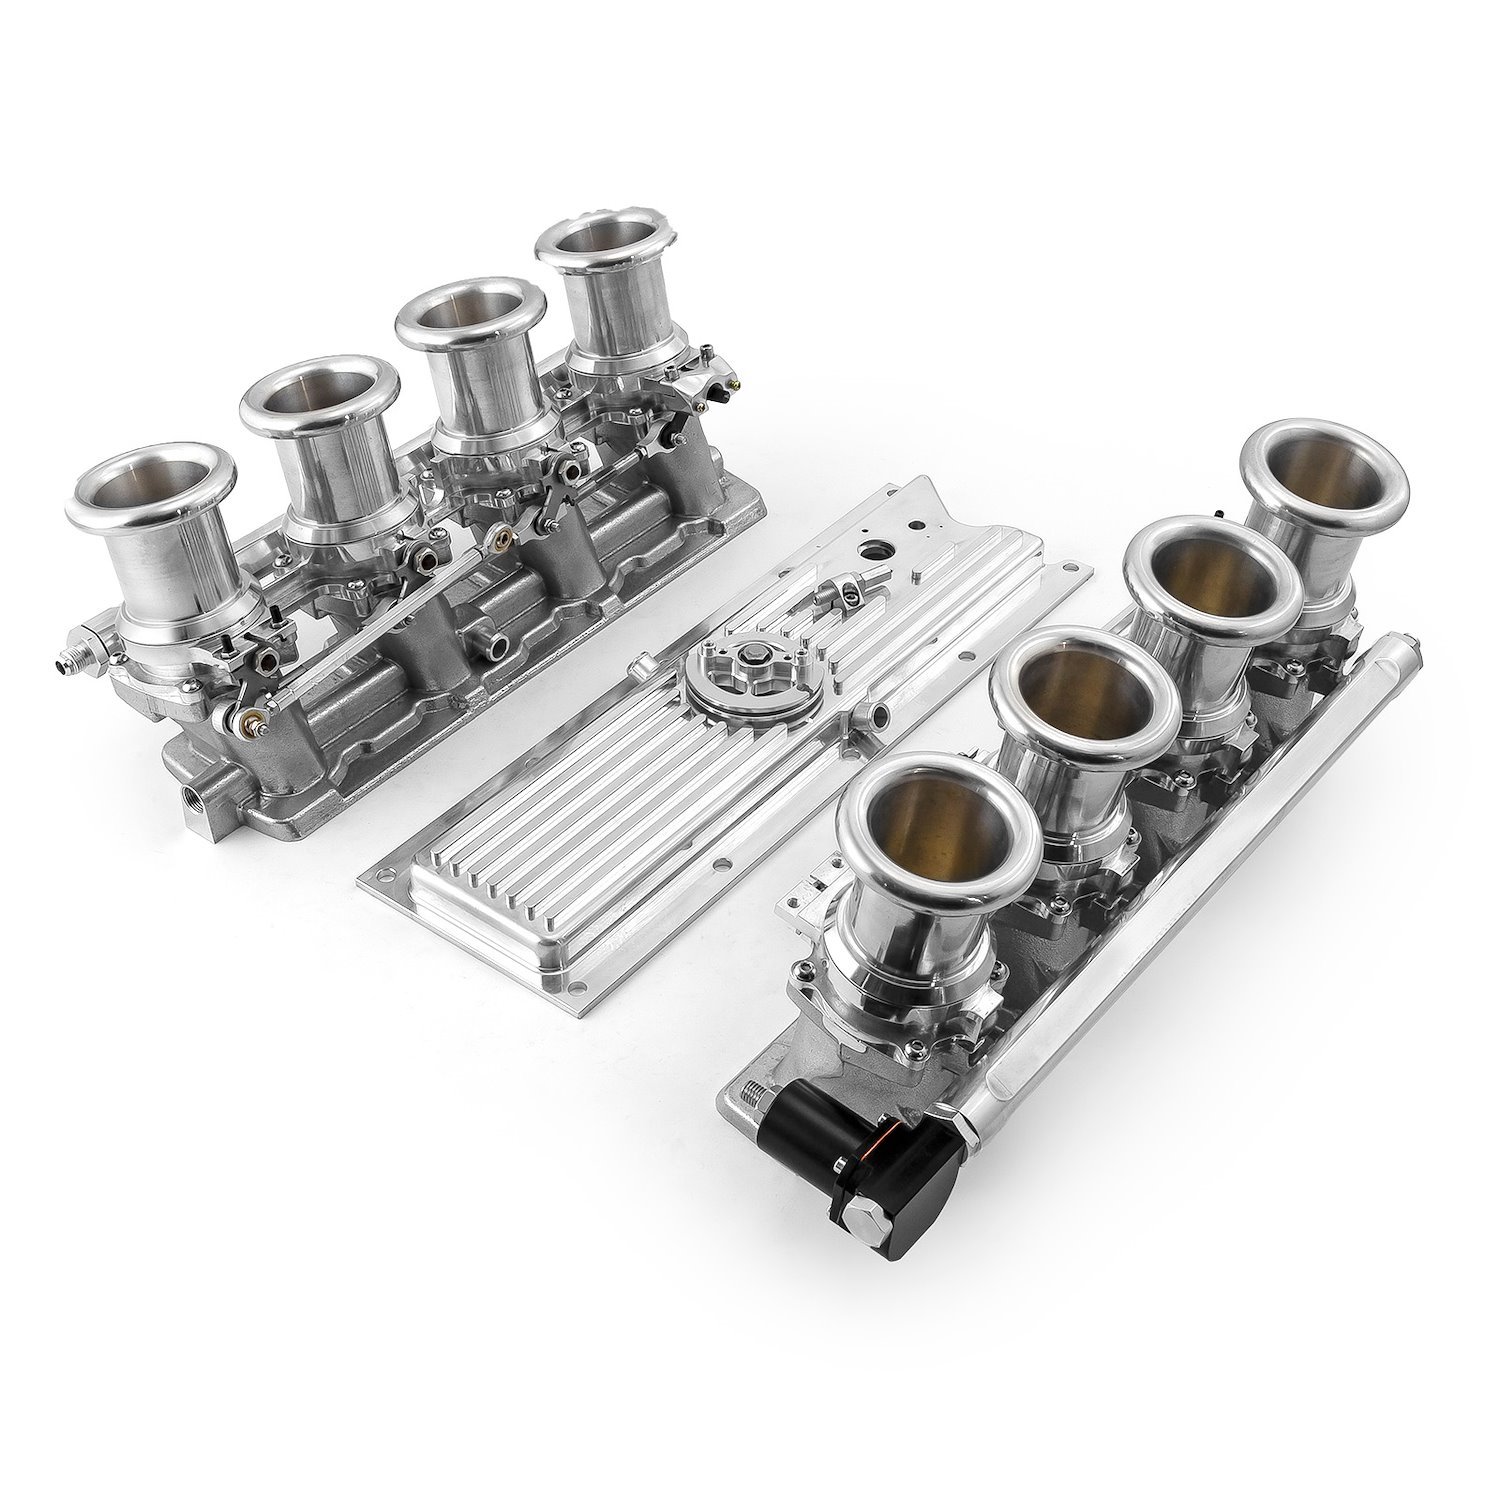 Complete Downdraft EFI Stack Intake Manifold System [Chevy LS1 Fuel Injected] Polished